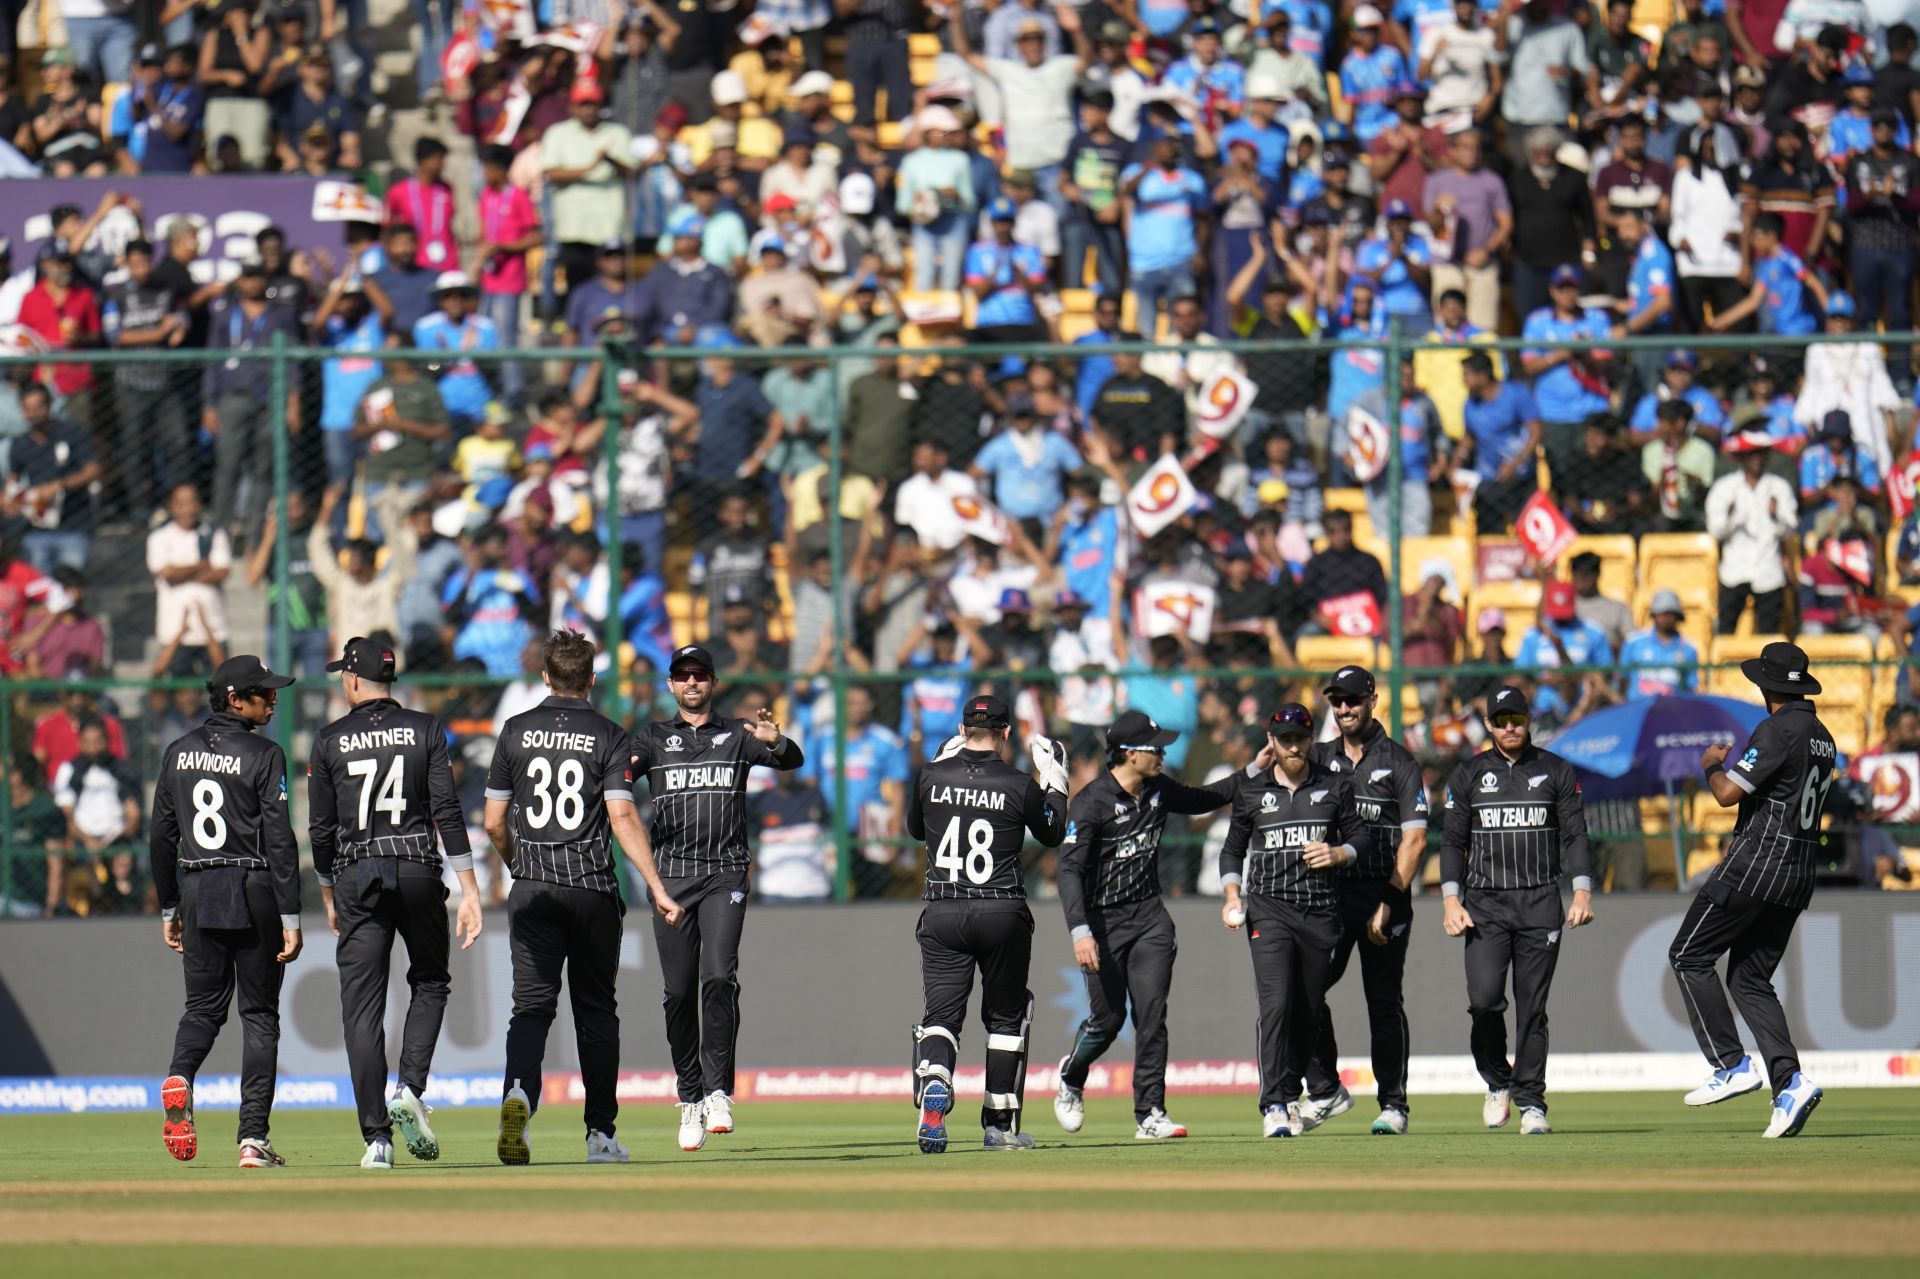 New Zealand&rsquo;s impressive net run rate could help their push for finishing in the top four of the 2023 World Cup points table. (Pic: AP)